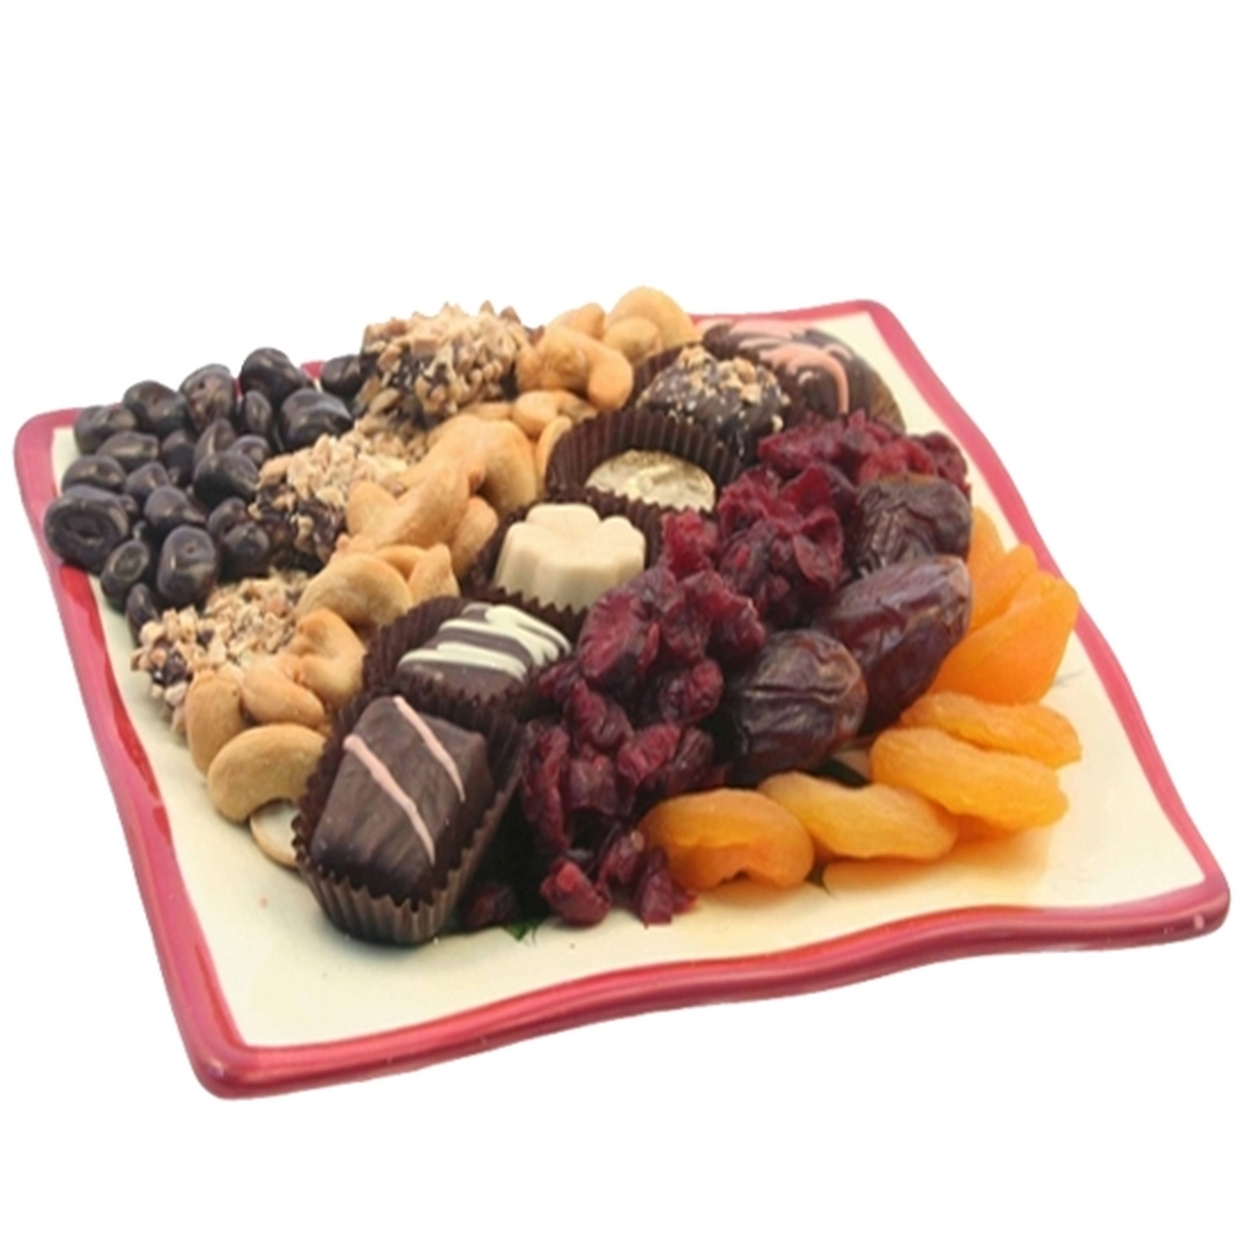 Chocolate Fruit cake - Send gifts to Hyderabad From USA|Gifts to Hyderabad  India same day delivery |online birthday gifts delivery in Hyderabad